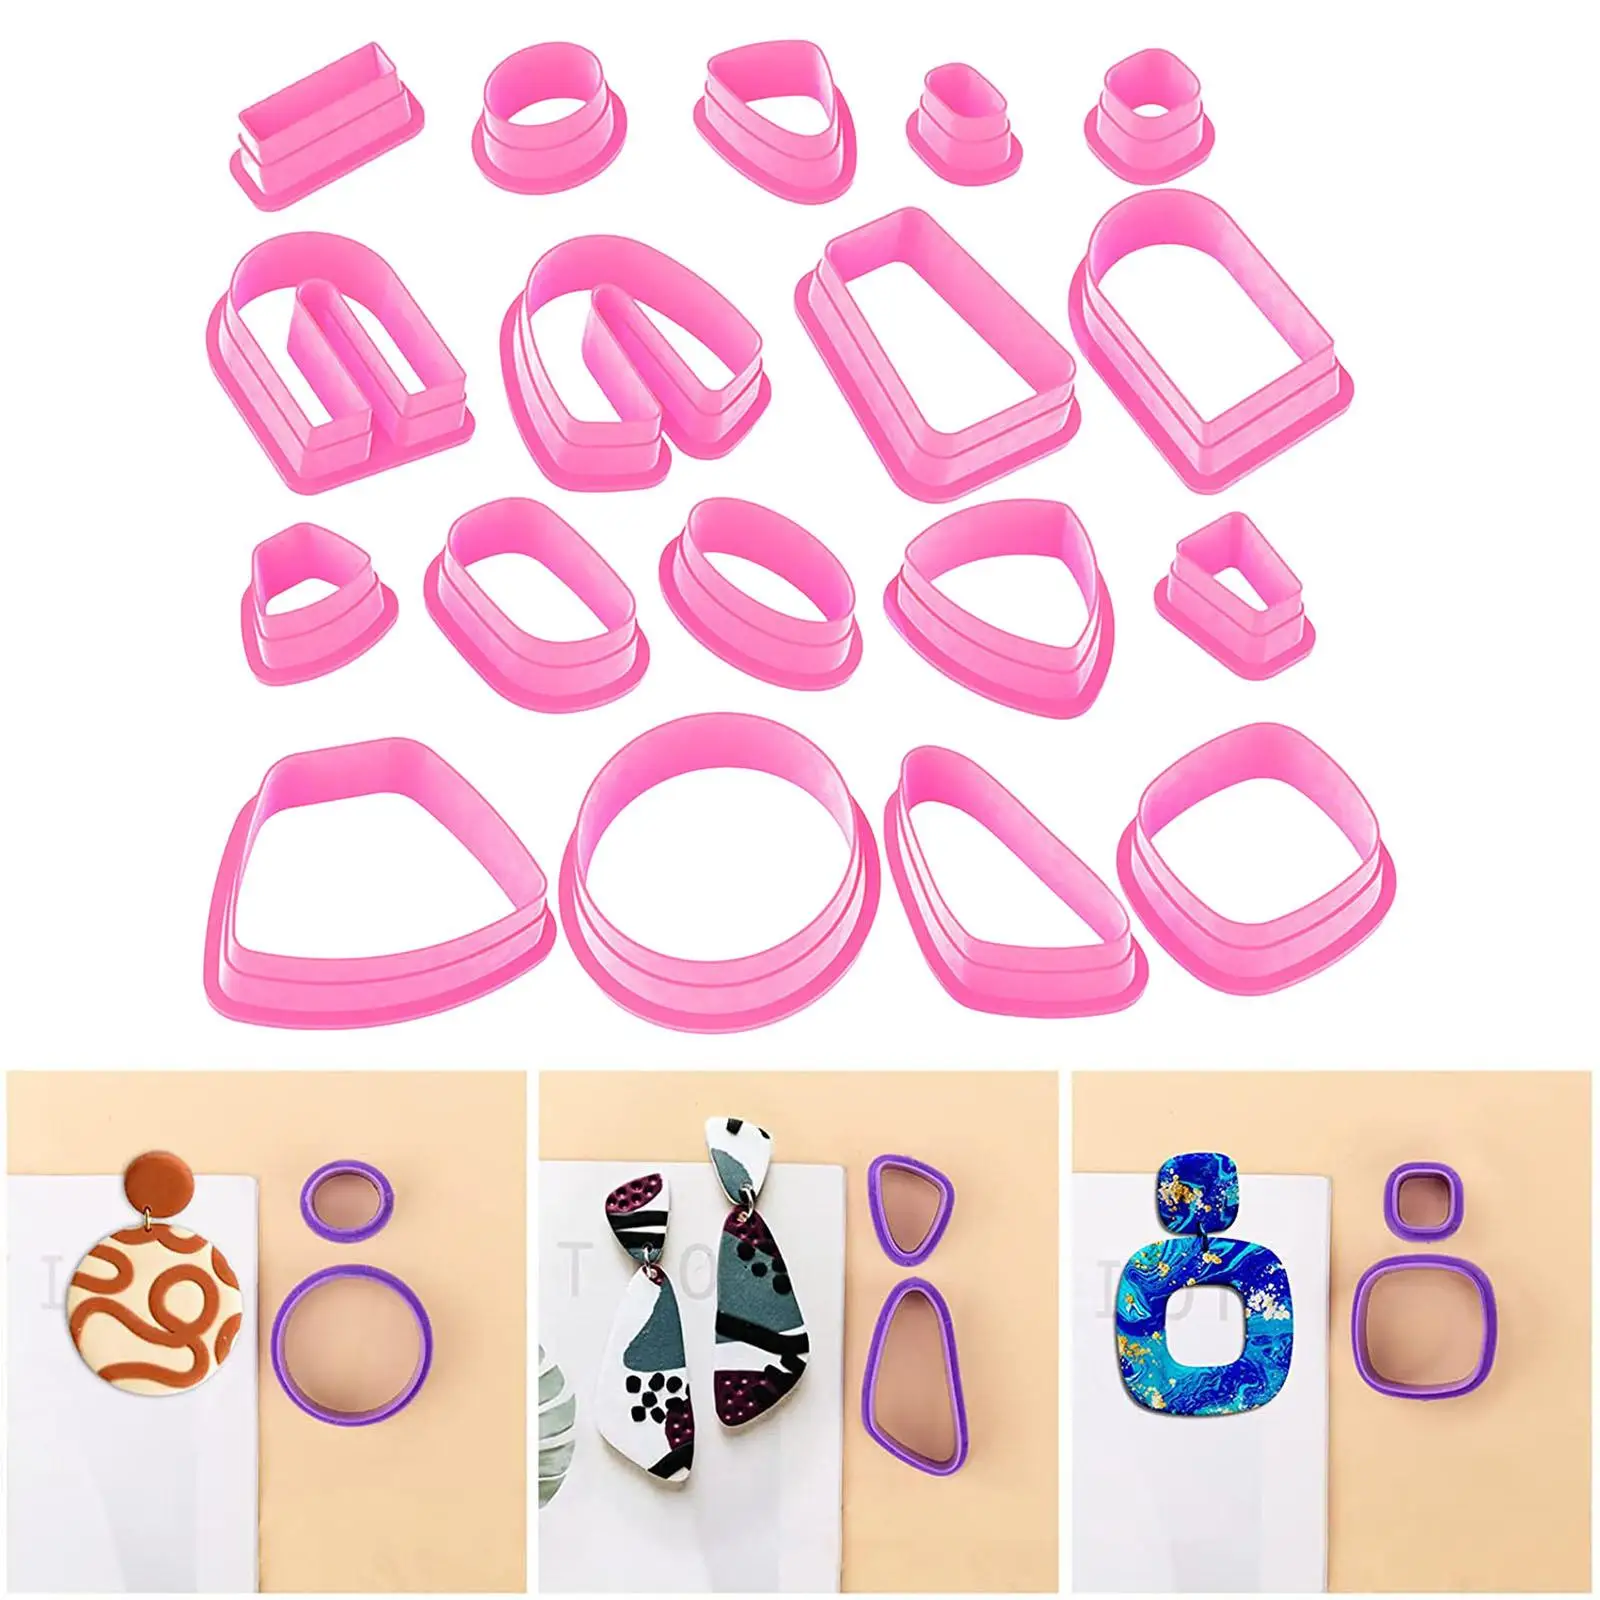 18x Polymer Clay Cutters Earring Making Supplies Shapes Art Crafts Polymer Clay Jewelry Jewelry Making Clay Cutting Tools Molds